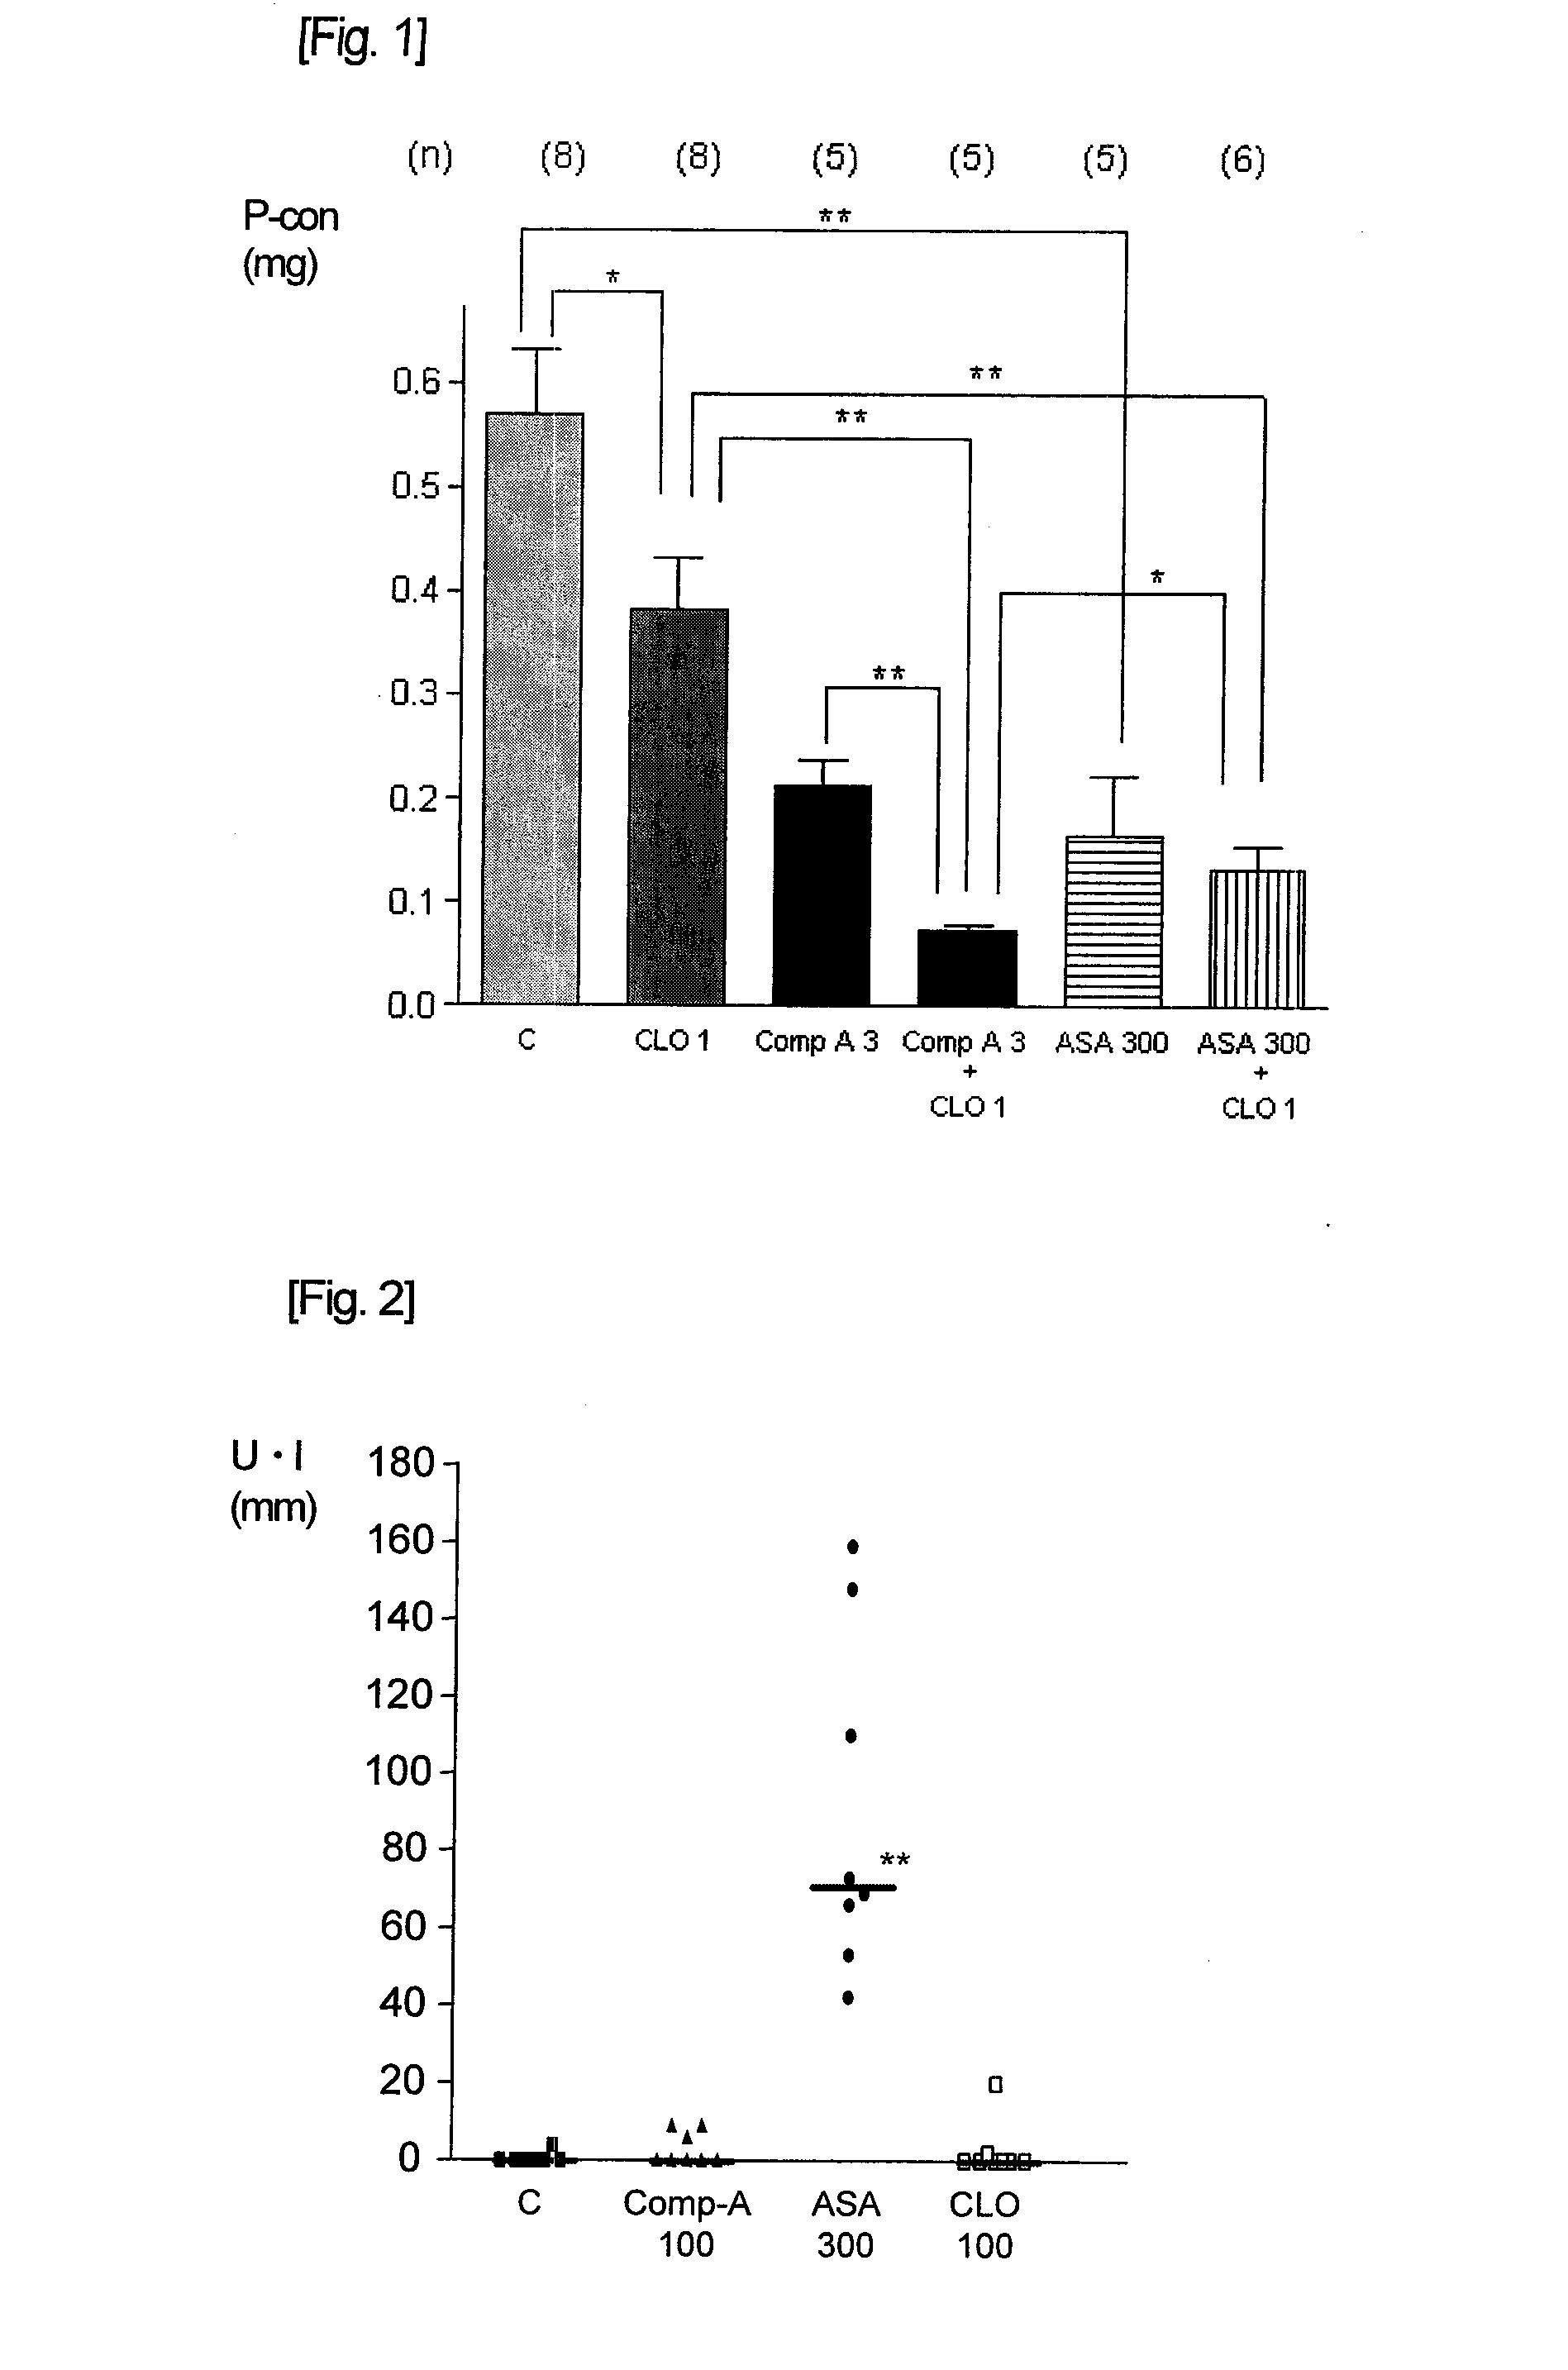 Agent for preventing and/or treating vascular diseases